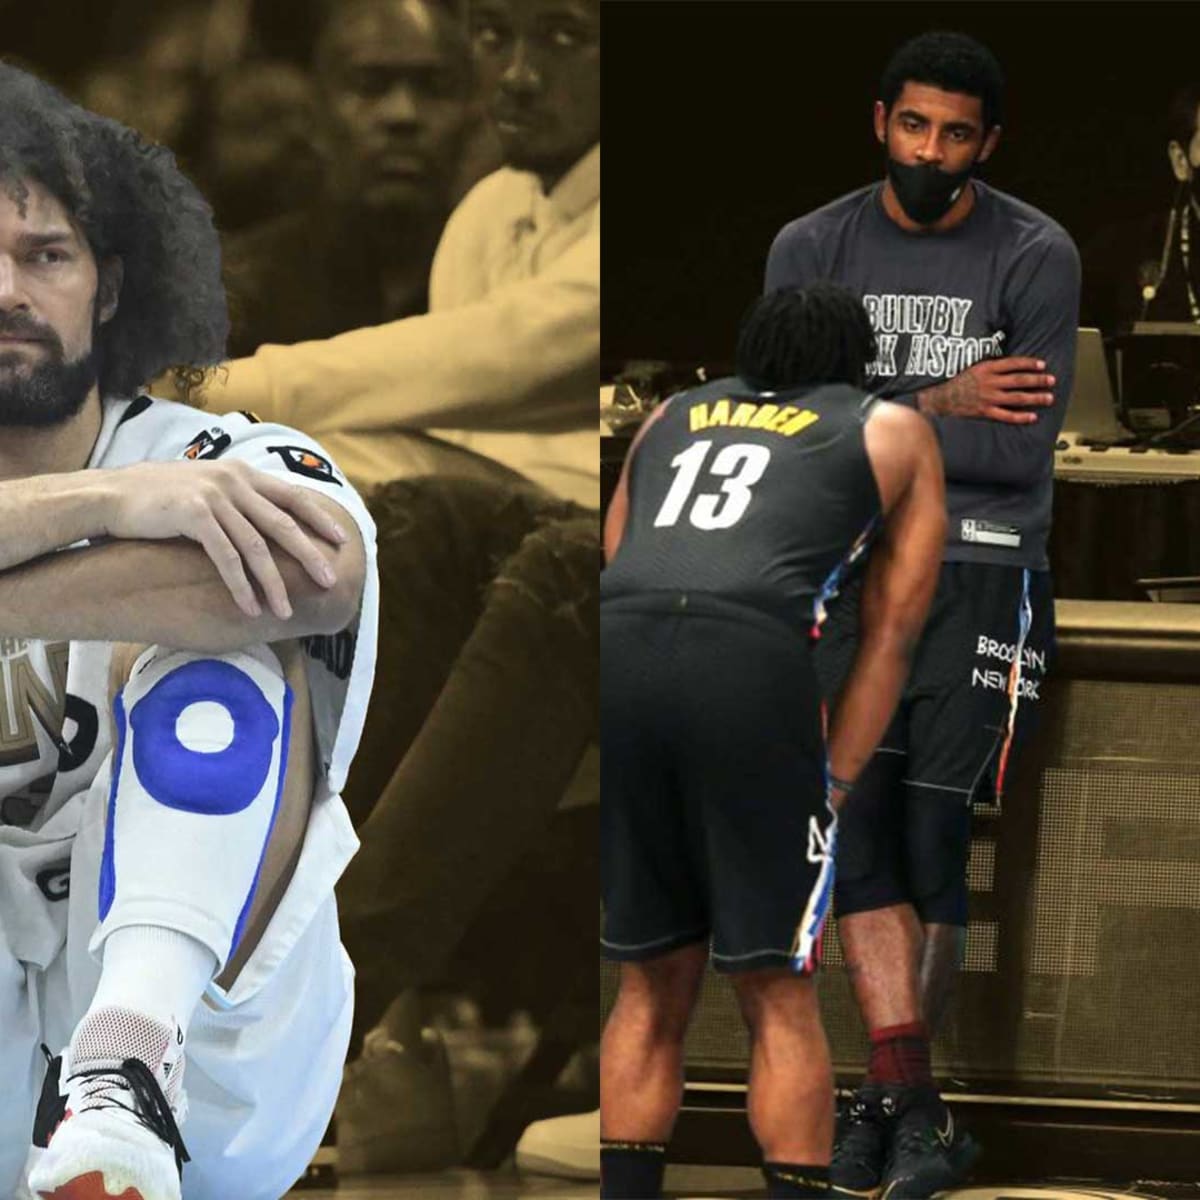 Robin Lopez doesn't like the Golden State Warriors' new uniforms